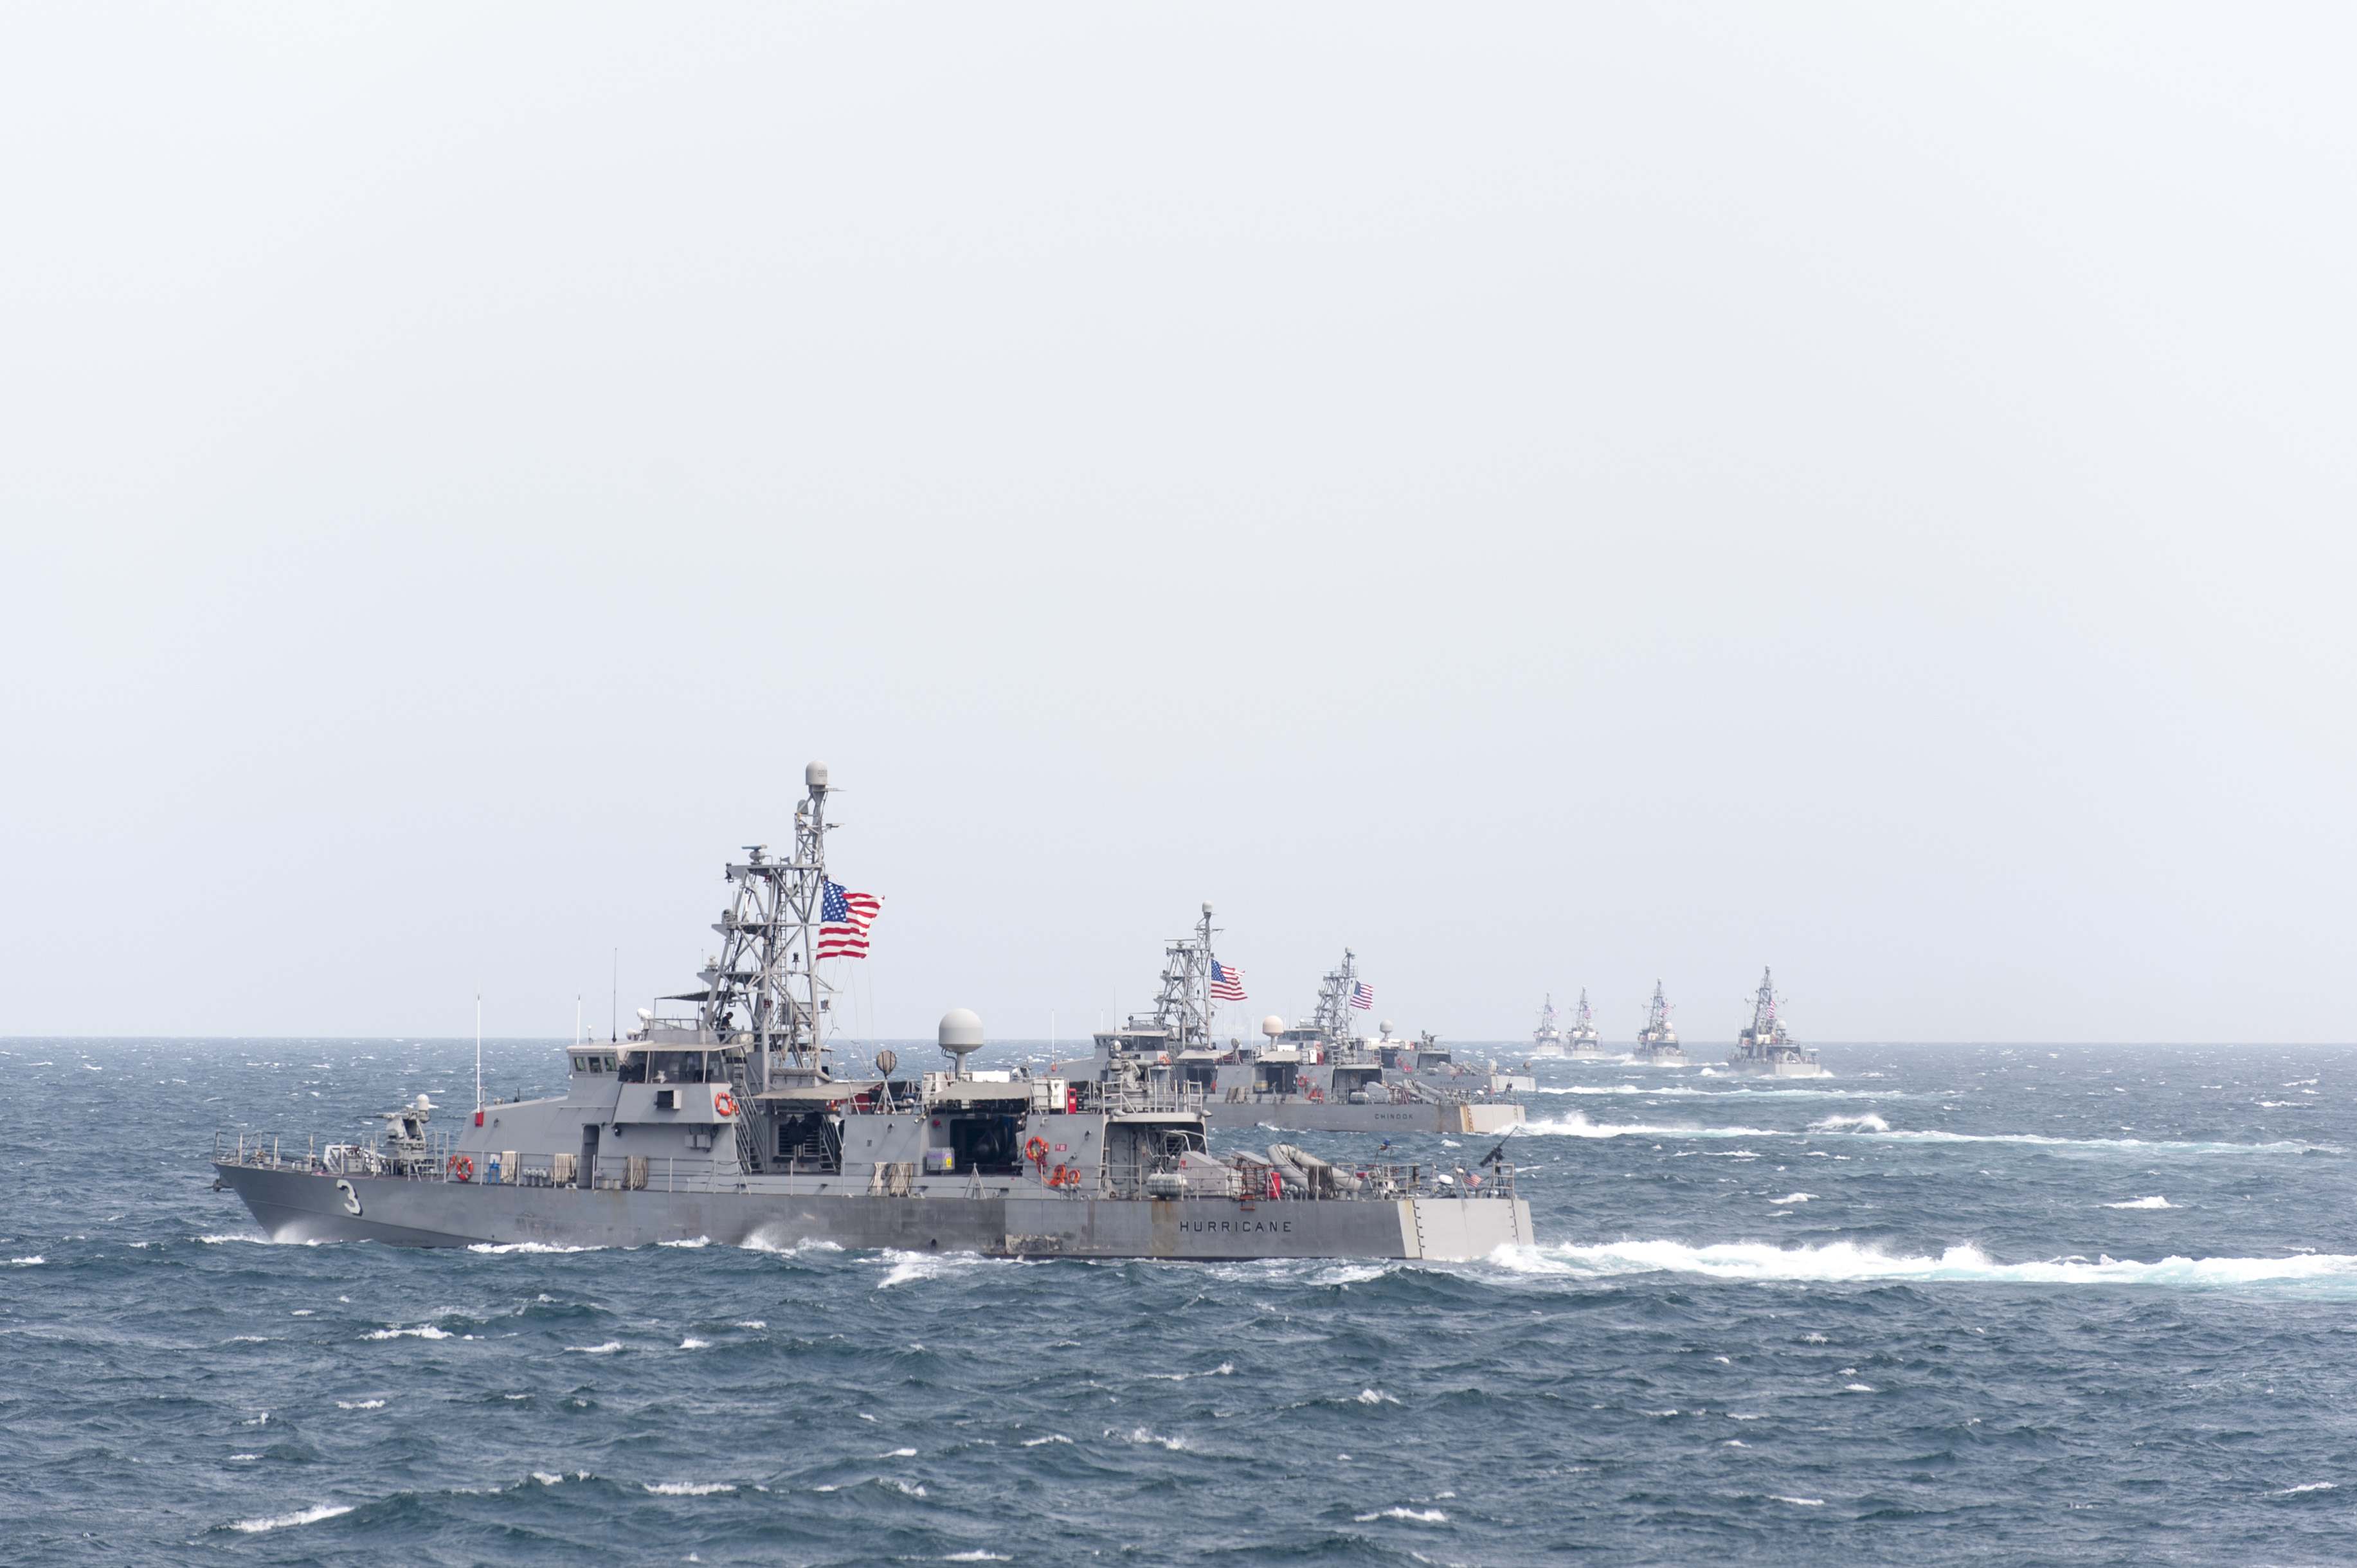 Cyclone-class coastal patrol ship USS Hurricane (PC 3) and other coastal patrol ships assigned to Patrol Coastal Squadron 1 (PCRON 1) transit in formation during a divisional tactics exercise.PCRON 1 is deployed. 